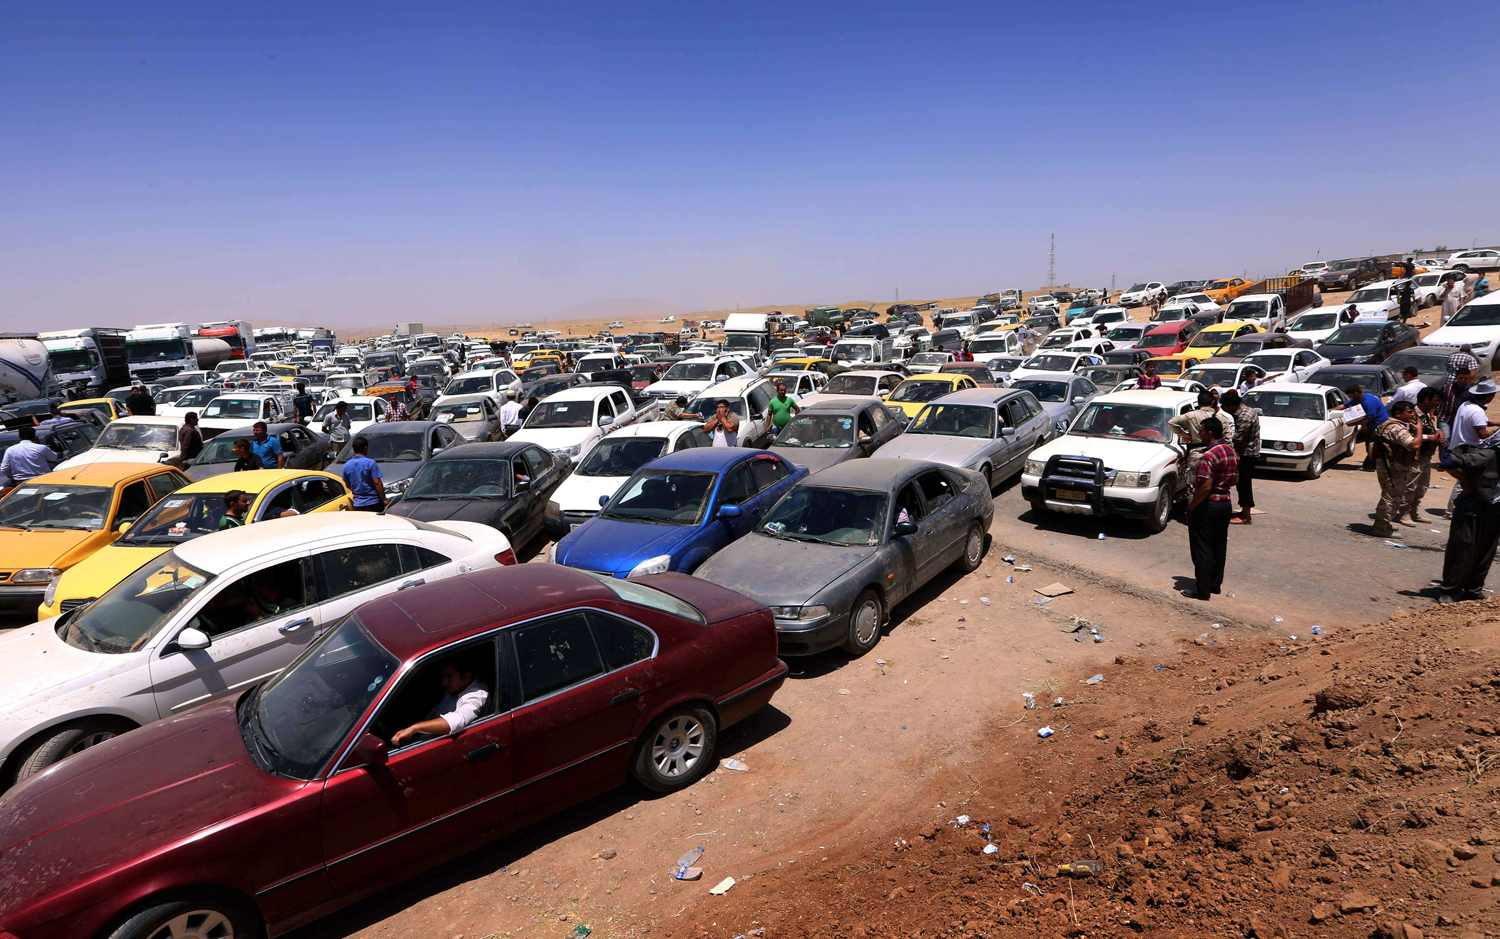 Iraqis fleeing violence in Nineveh province wait in their vehicles at a Kurdish checkpoint in Aski Kalak, 25 miles west of Arbil, the capital of the autonomous Kurdish region of northern Iraq, on June 10, 2014. (Safin Hamed—AFP/Getty Images)